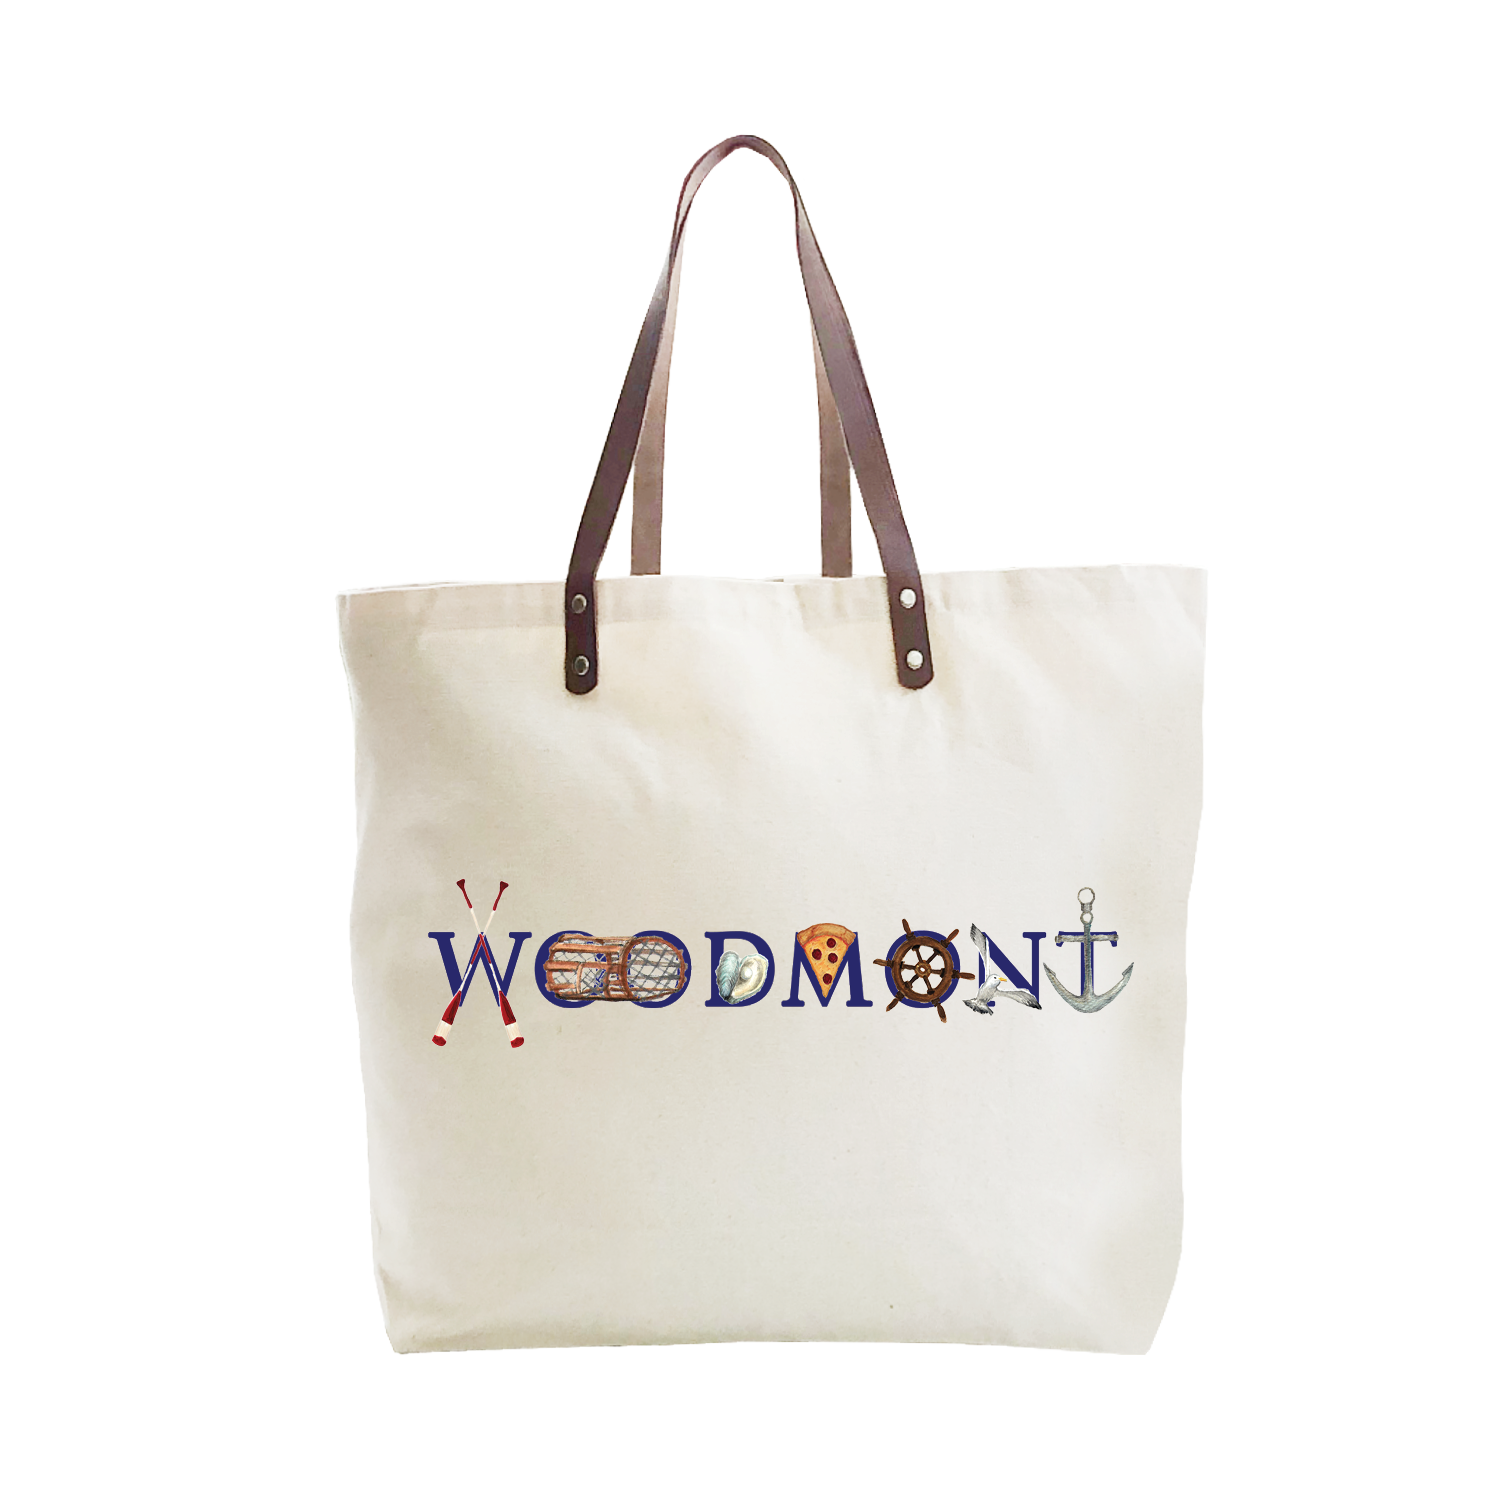 woodmont large tote